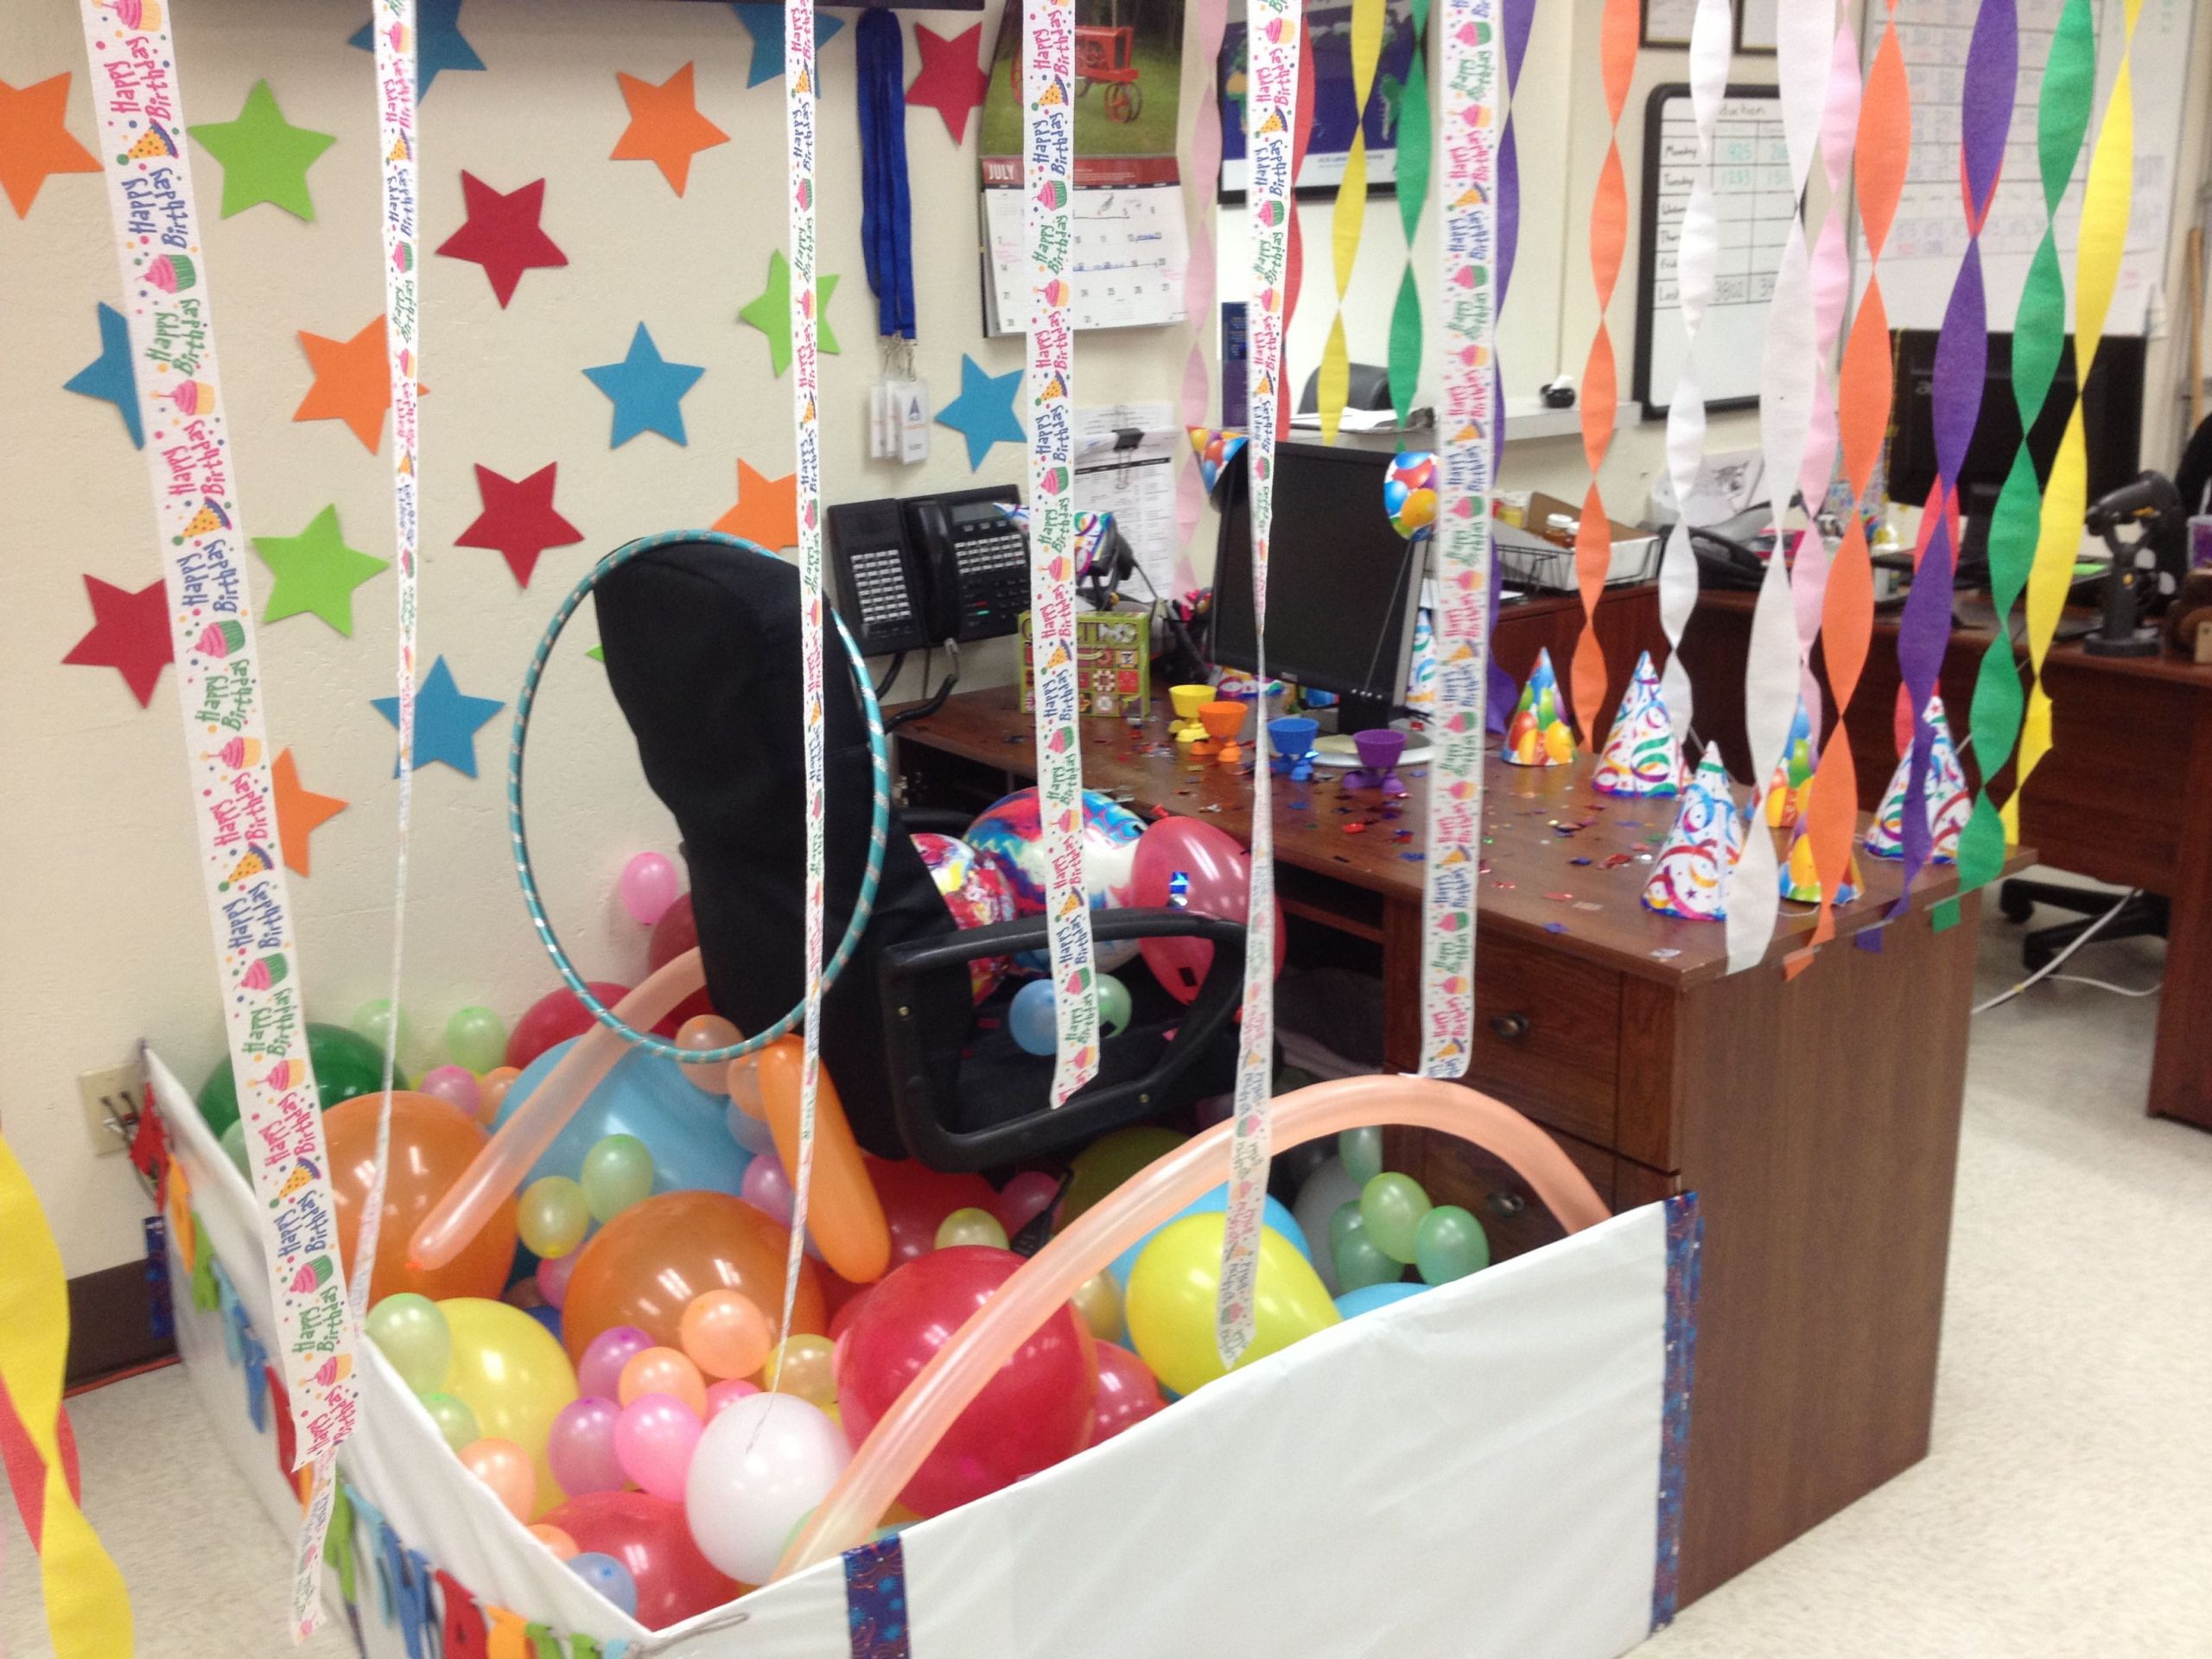 Office Birthday Decoration Ideas
 How To Decorate A Cubicle For 50th Birthday